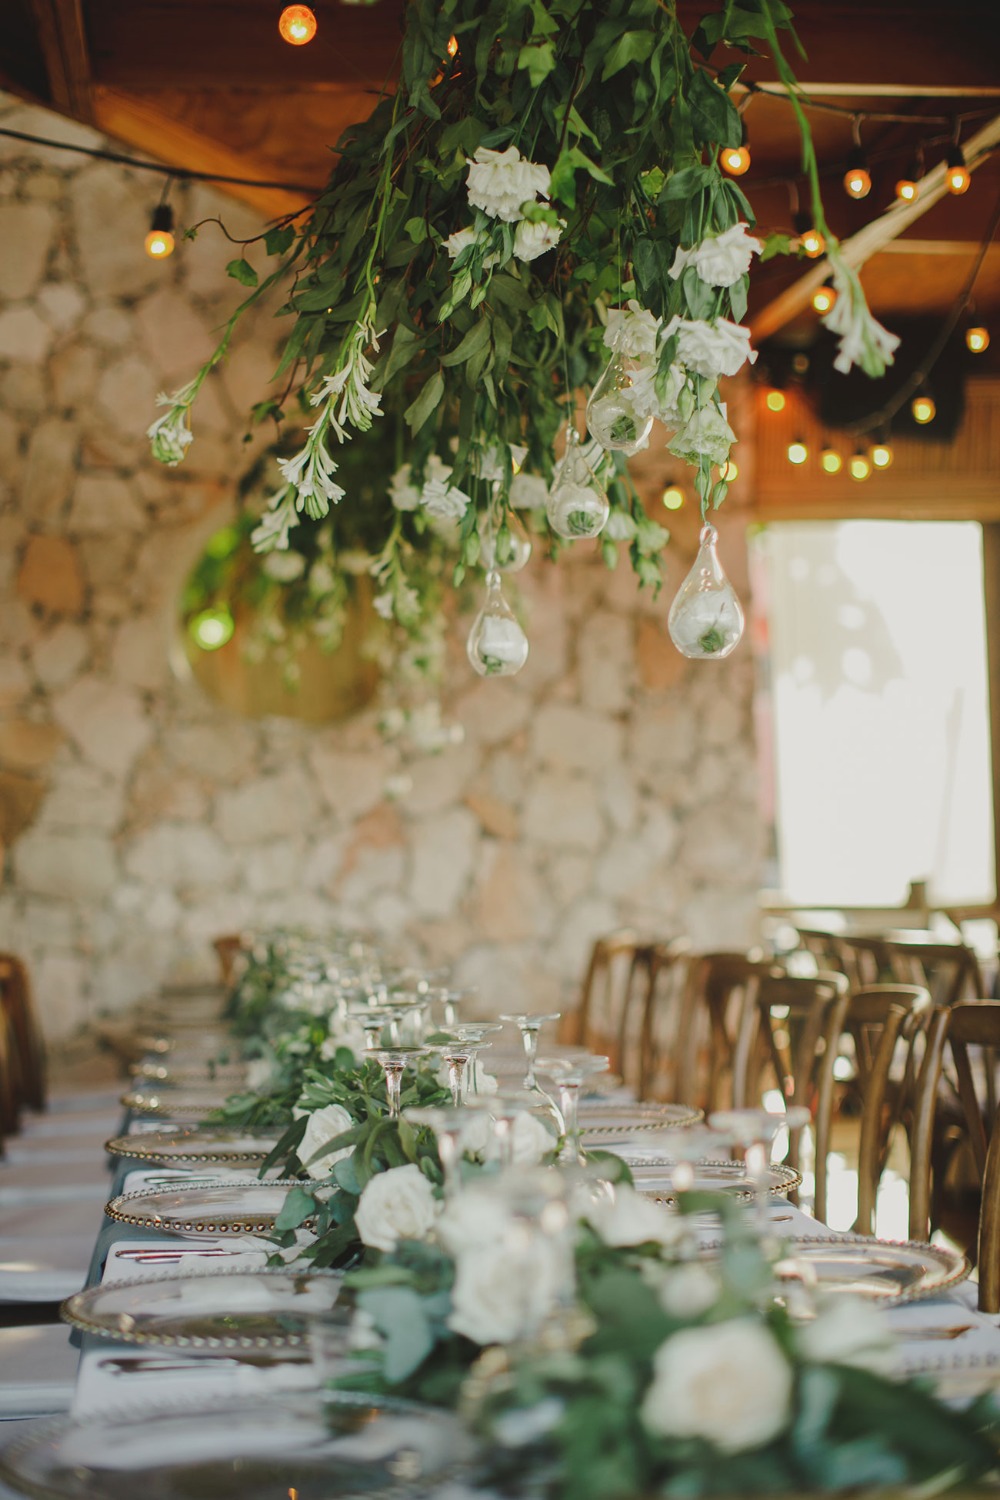 glamorous table setting with hanging flowers